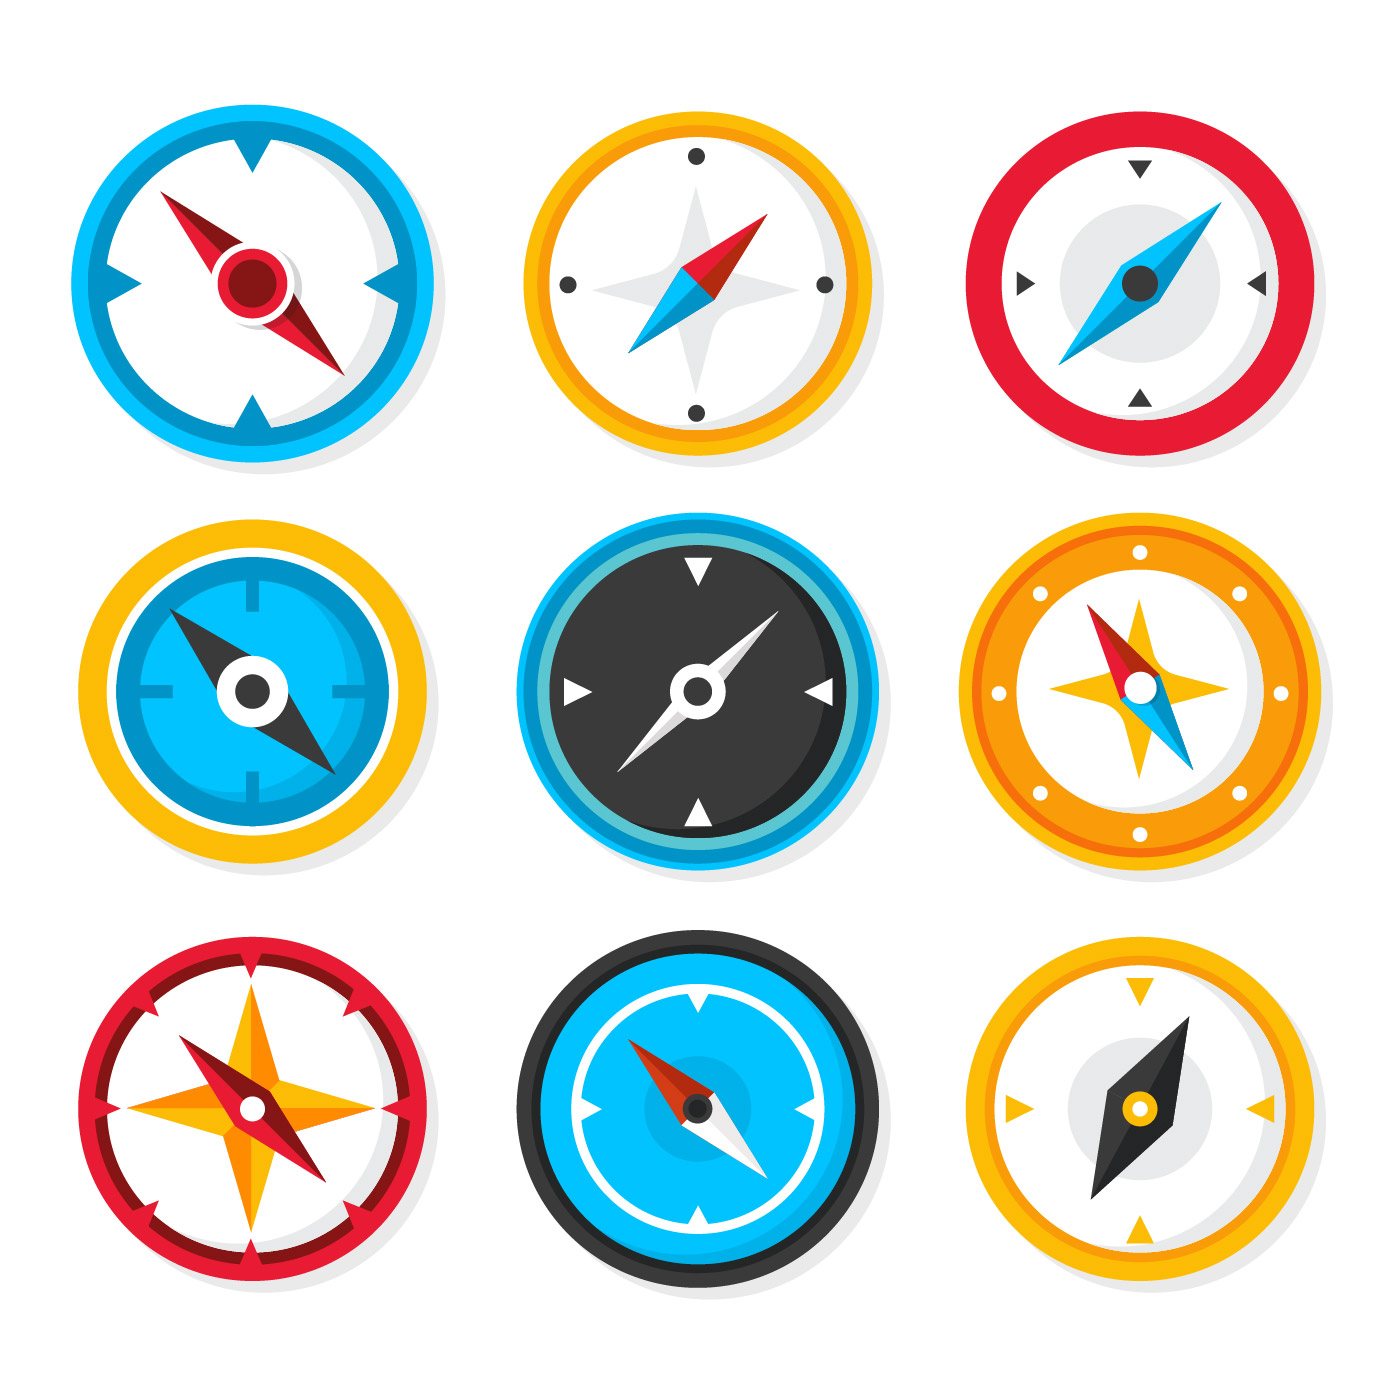 Download Compass Collection Vector 224223 - Download Free Vectors ...